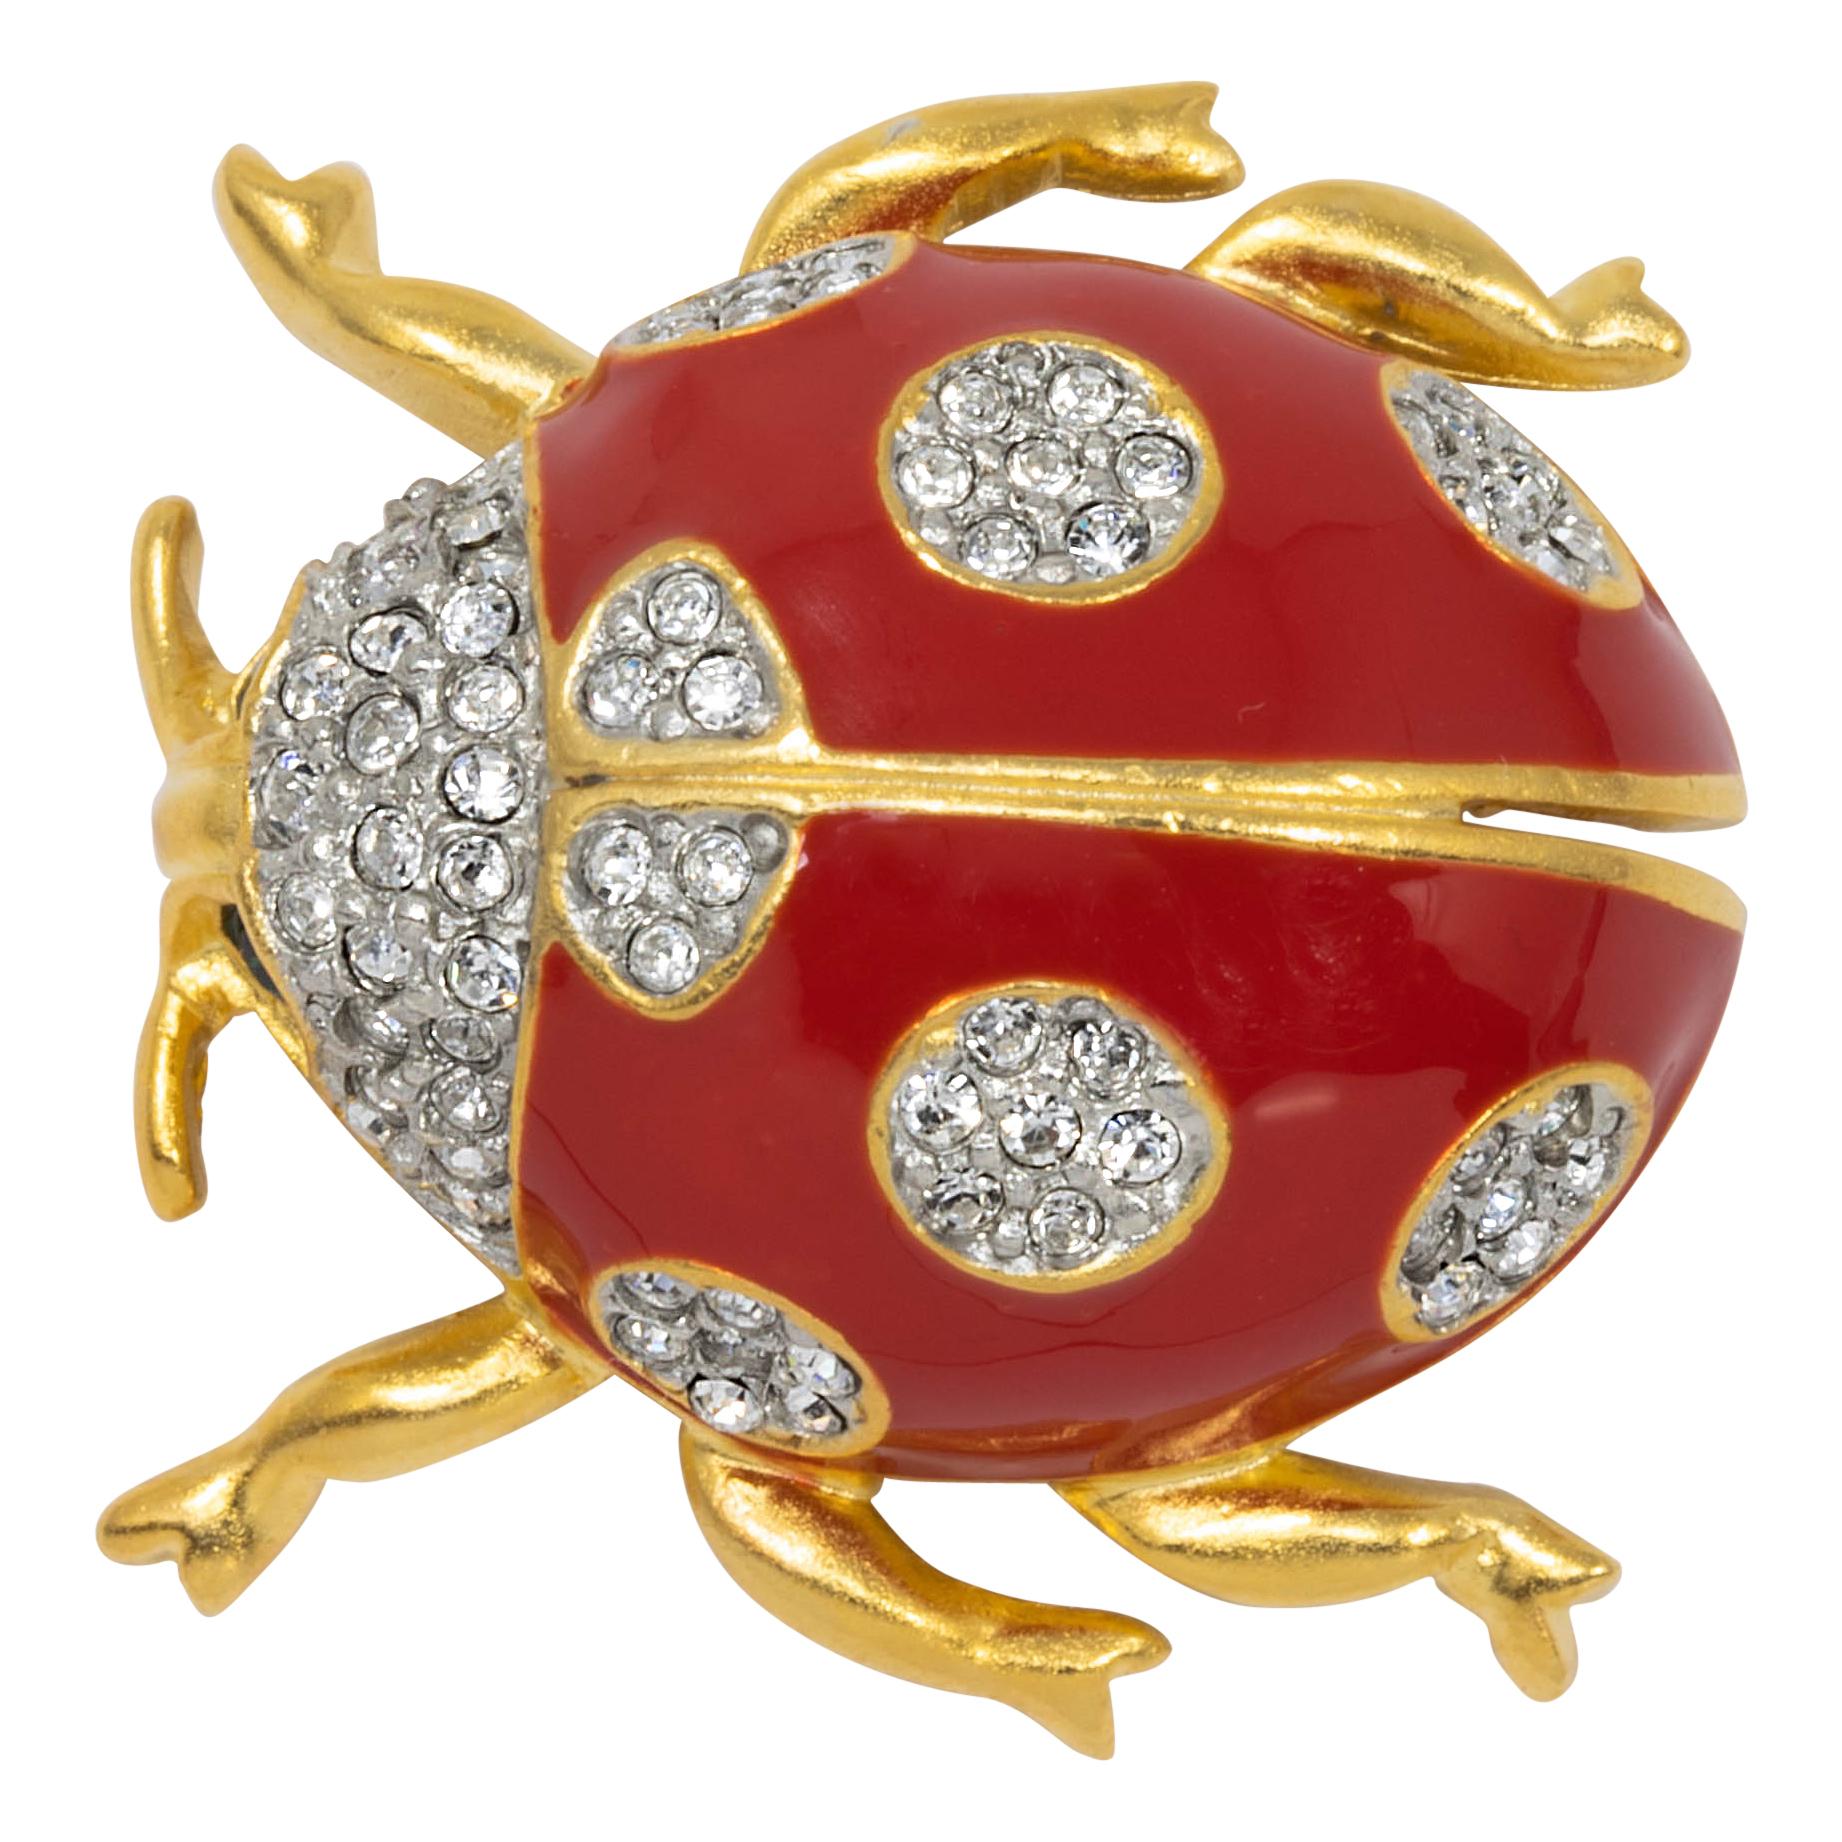 KJL Kenneth Jay Lane Gold Lady Bug Pin, Clear Crystals, Red and Black Enamel